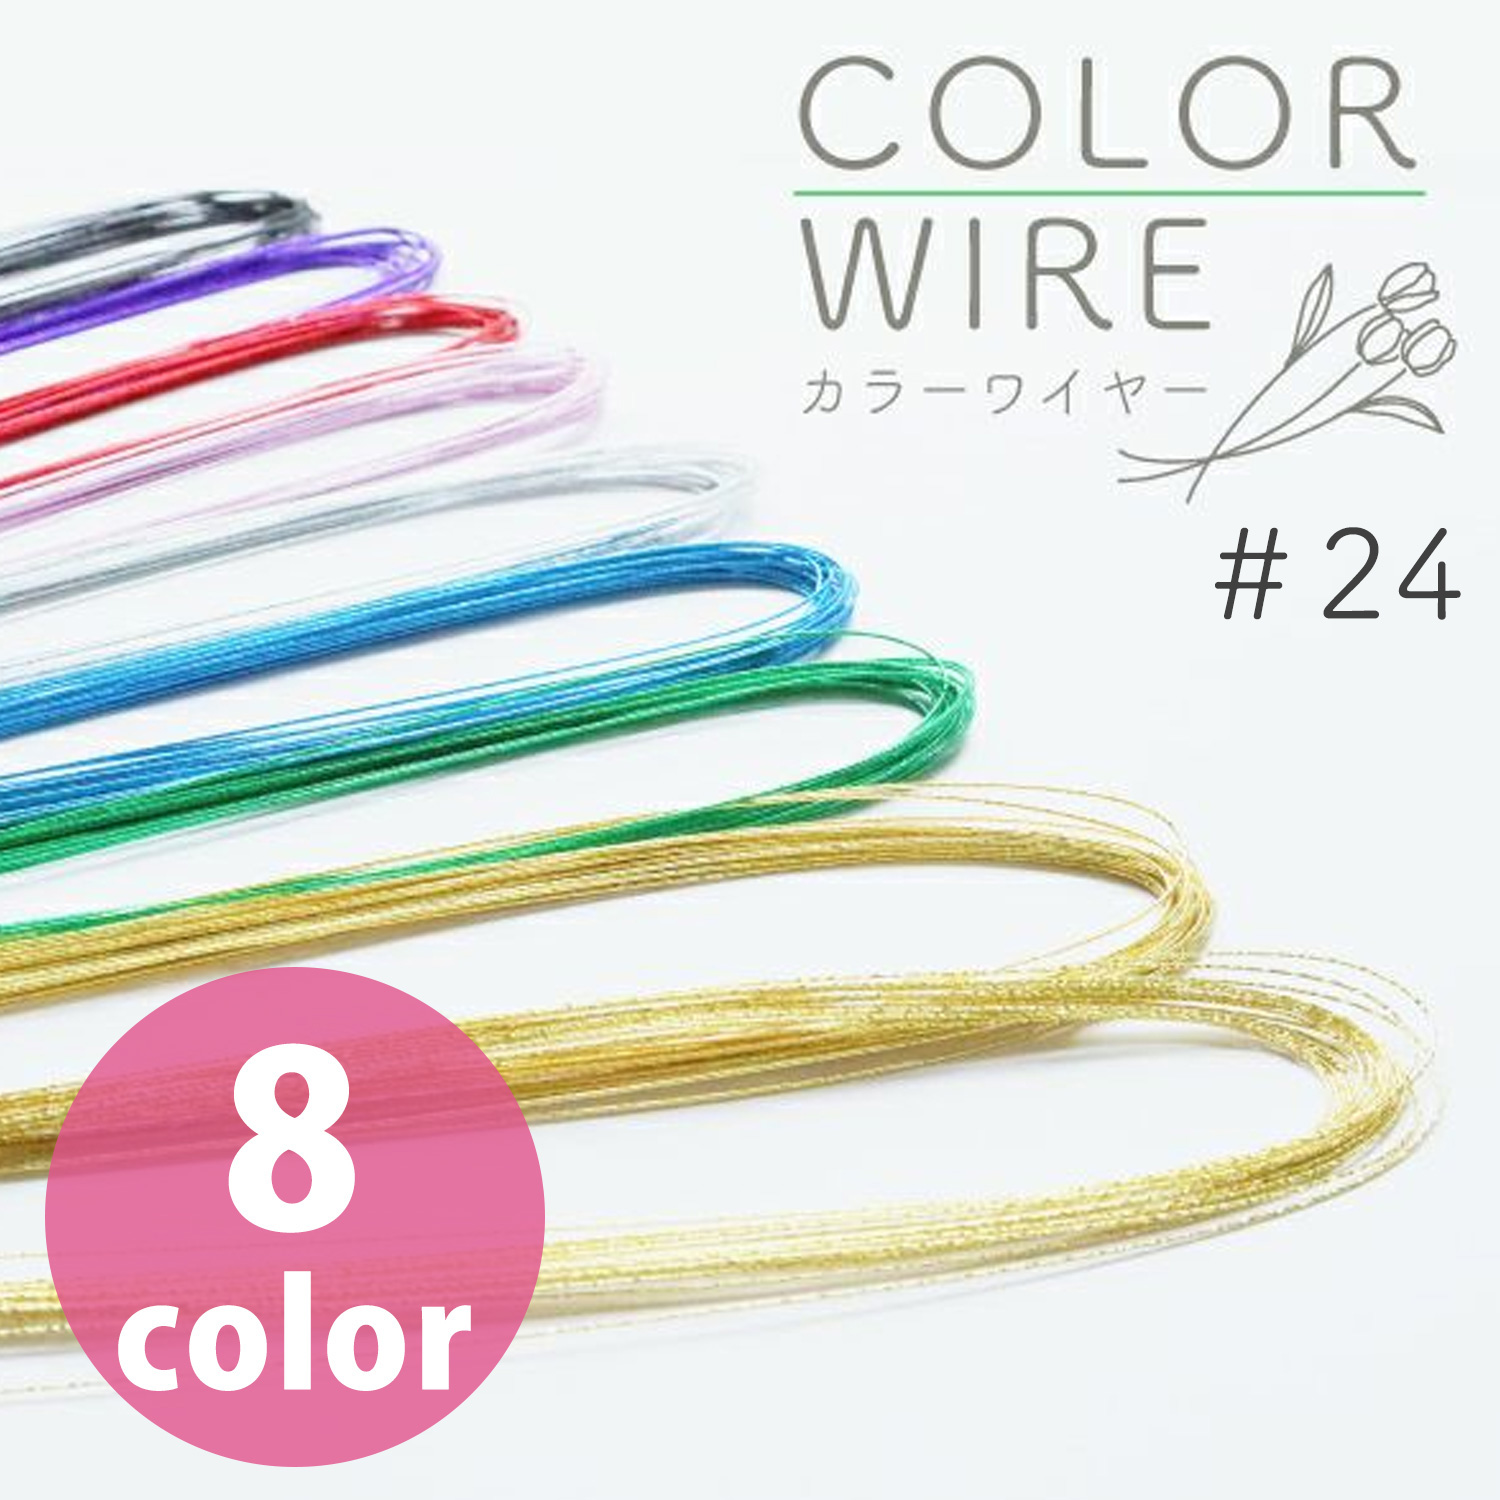 MAF-24 Color wire #24 72cm approximately 20 pieces (bag)